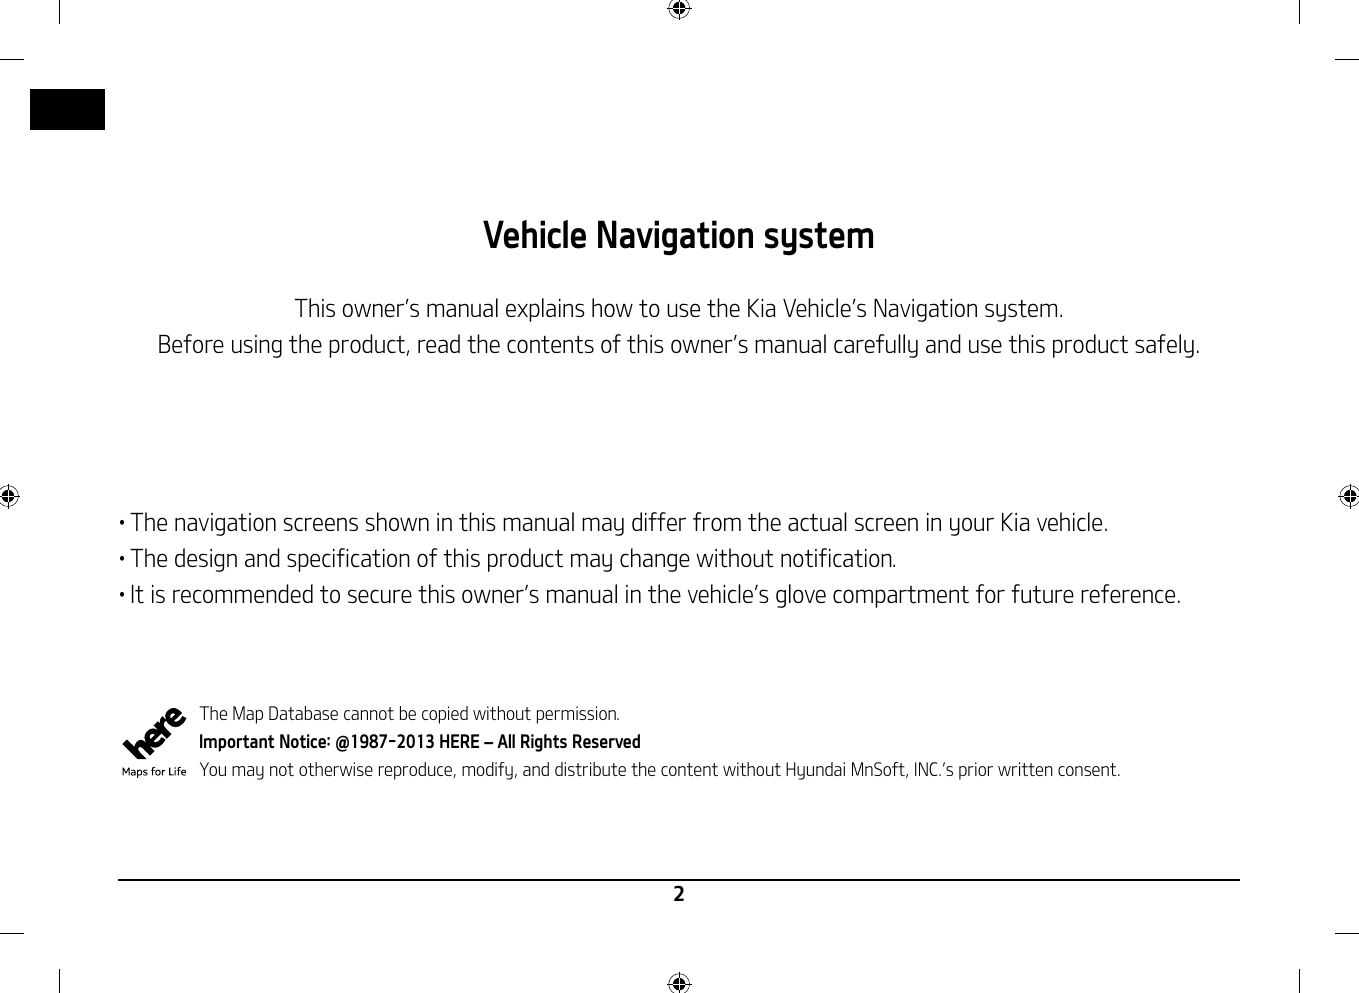 2Vehicle Navigation systemThis owner䳓s manual explains how to use the Kia Vehicle䳓s Navigation system.Before using the product, read the contents of this owner䳓s manual carefully and use this product safely.䳜 The navigation screens shown in this manual may differ from the actual screen in your Kia vehicle.䳜 The design and specification of this product may change without notification.䳜 It is recommended to secure this owner䳓s manual in the vehicle䳓s glove compartment for future reference.  The Map Database cannot be copied without permission.Important Notice: @1987-2013 HERE 䳍 All Rights ReservedYou may not otherwise reproduce, modify, and distribute the content without Hyundai MnSoft, INC.䳓s prior written consent.